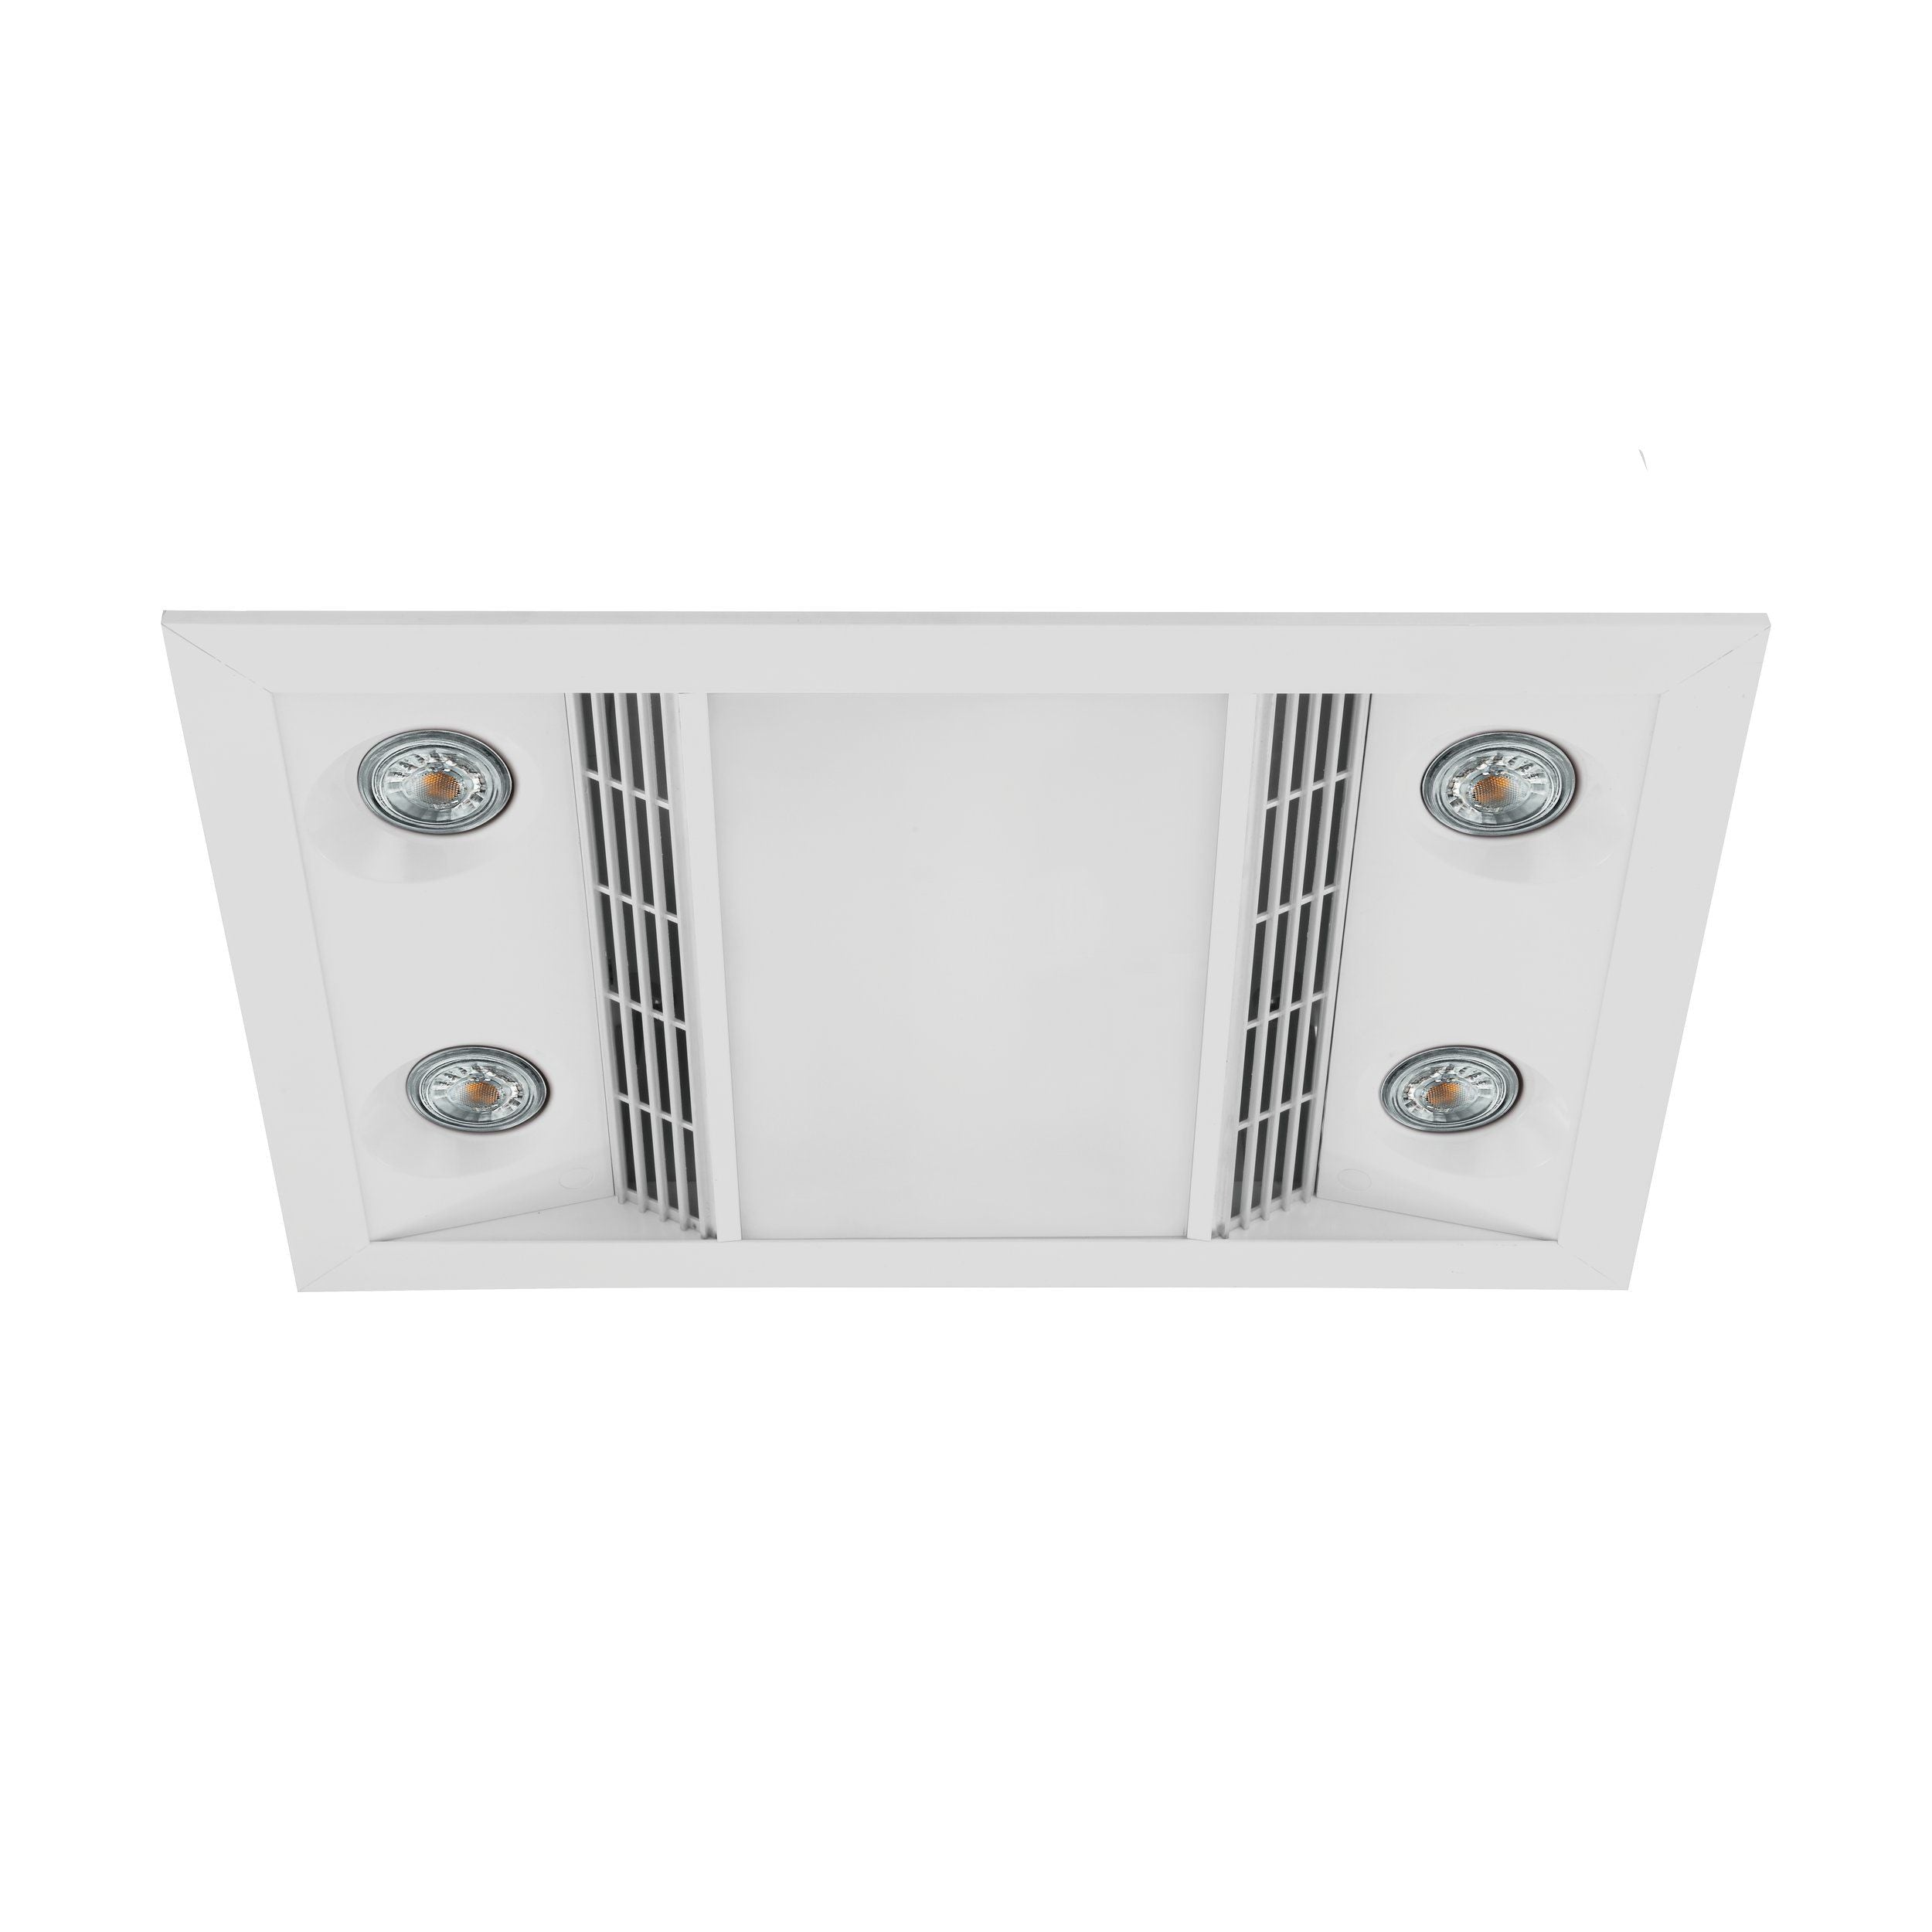 EGLO INFERNO 3-IN-1 BATHROOM FAN AND LIGHT WHITE